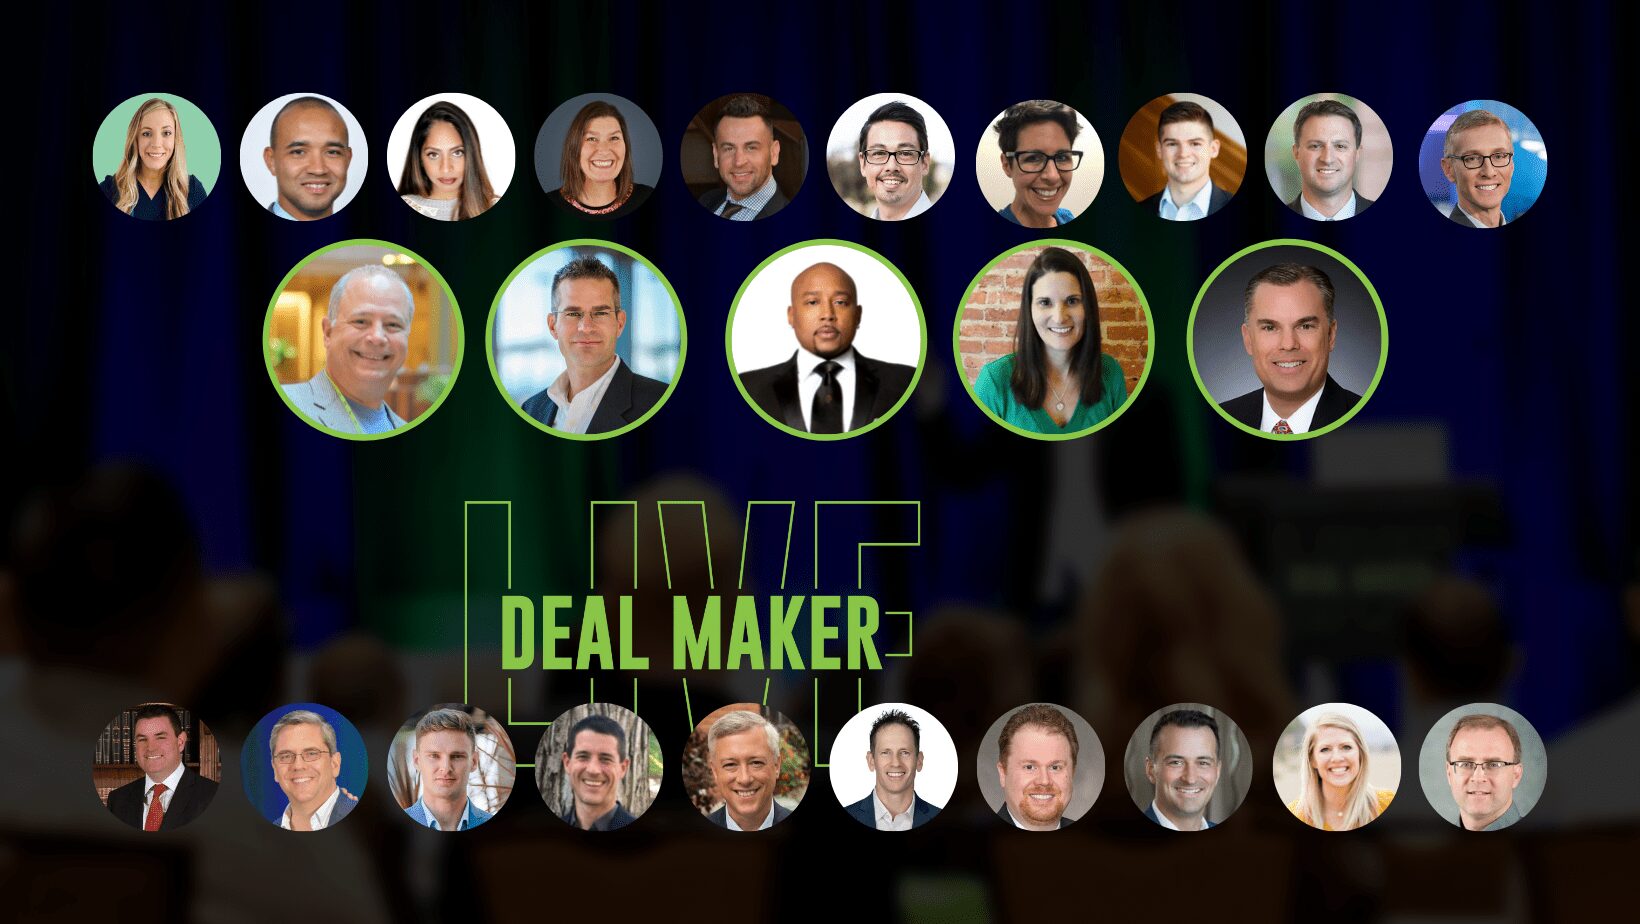 Why Should You Come to Deal Maker Live?